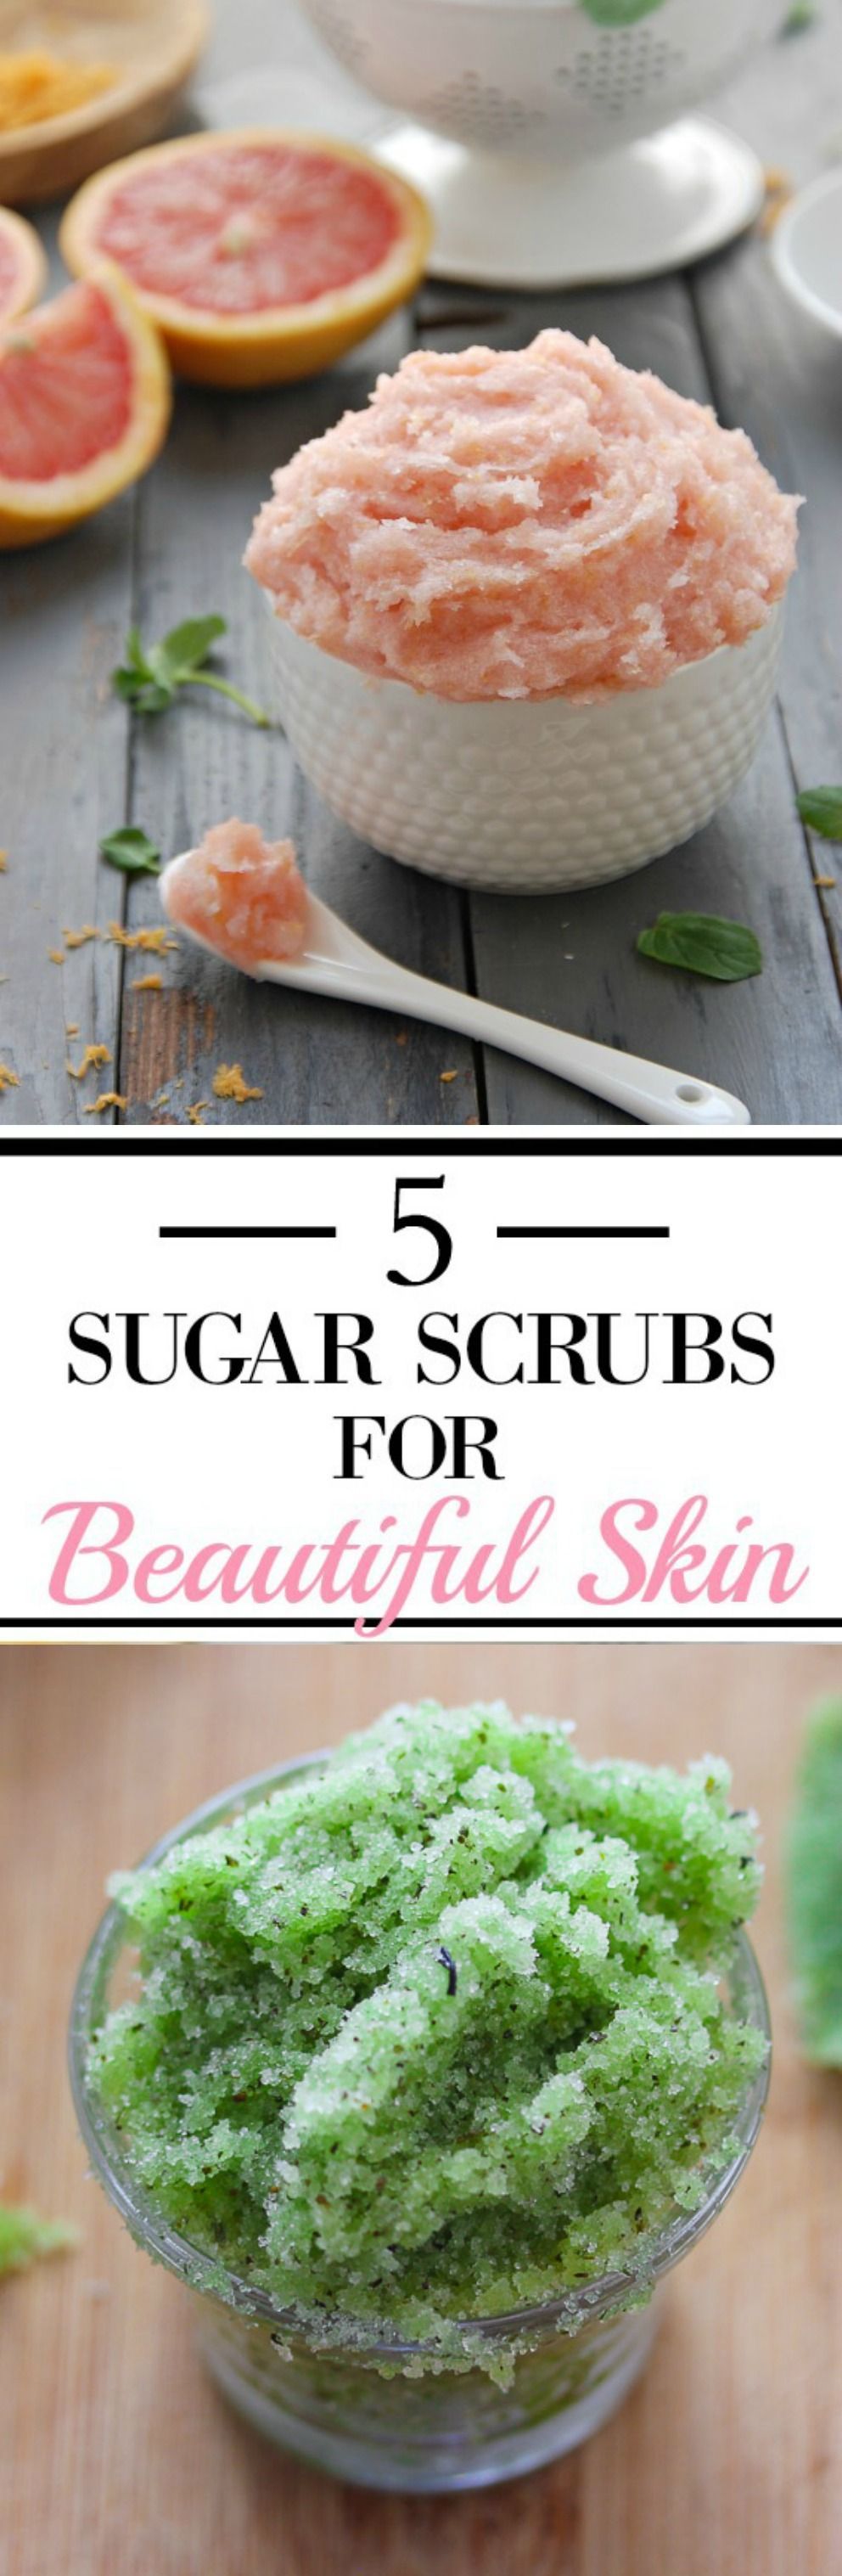 These 5 scrubs for beautiful skin are great! I tried the coffee one and my skin feels AMAZING! It also looks a bit younger too!